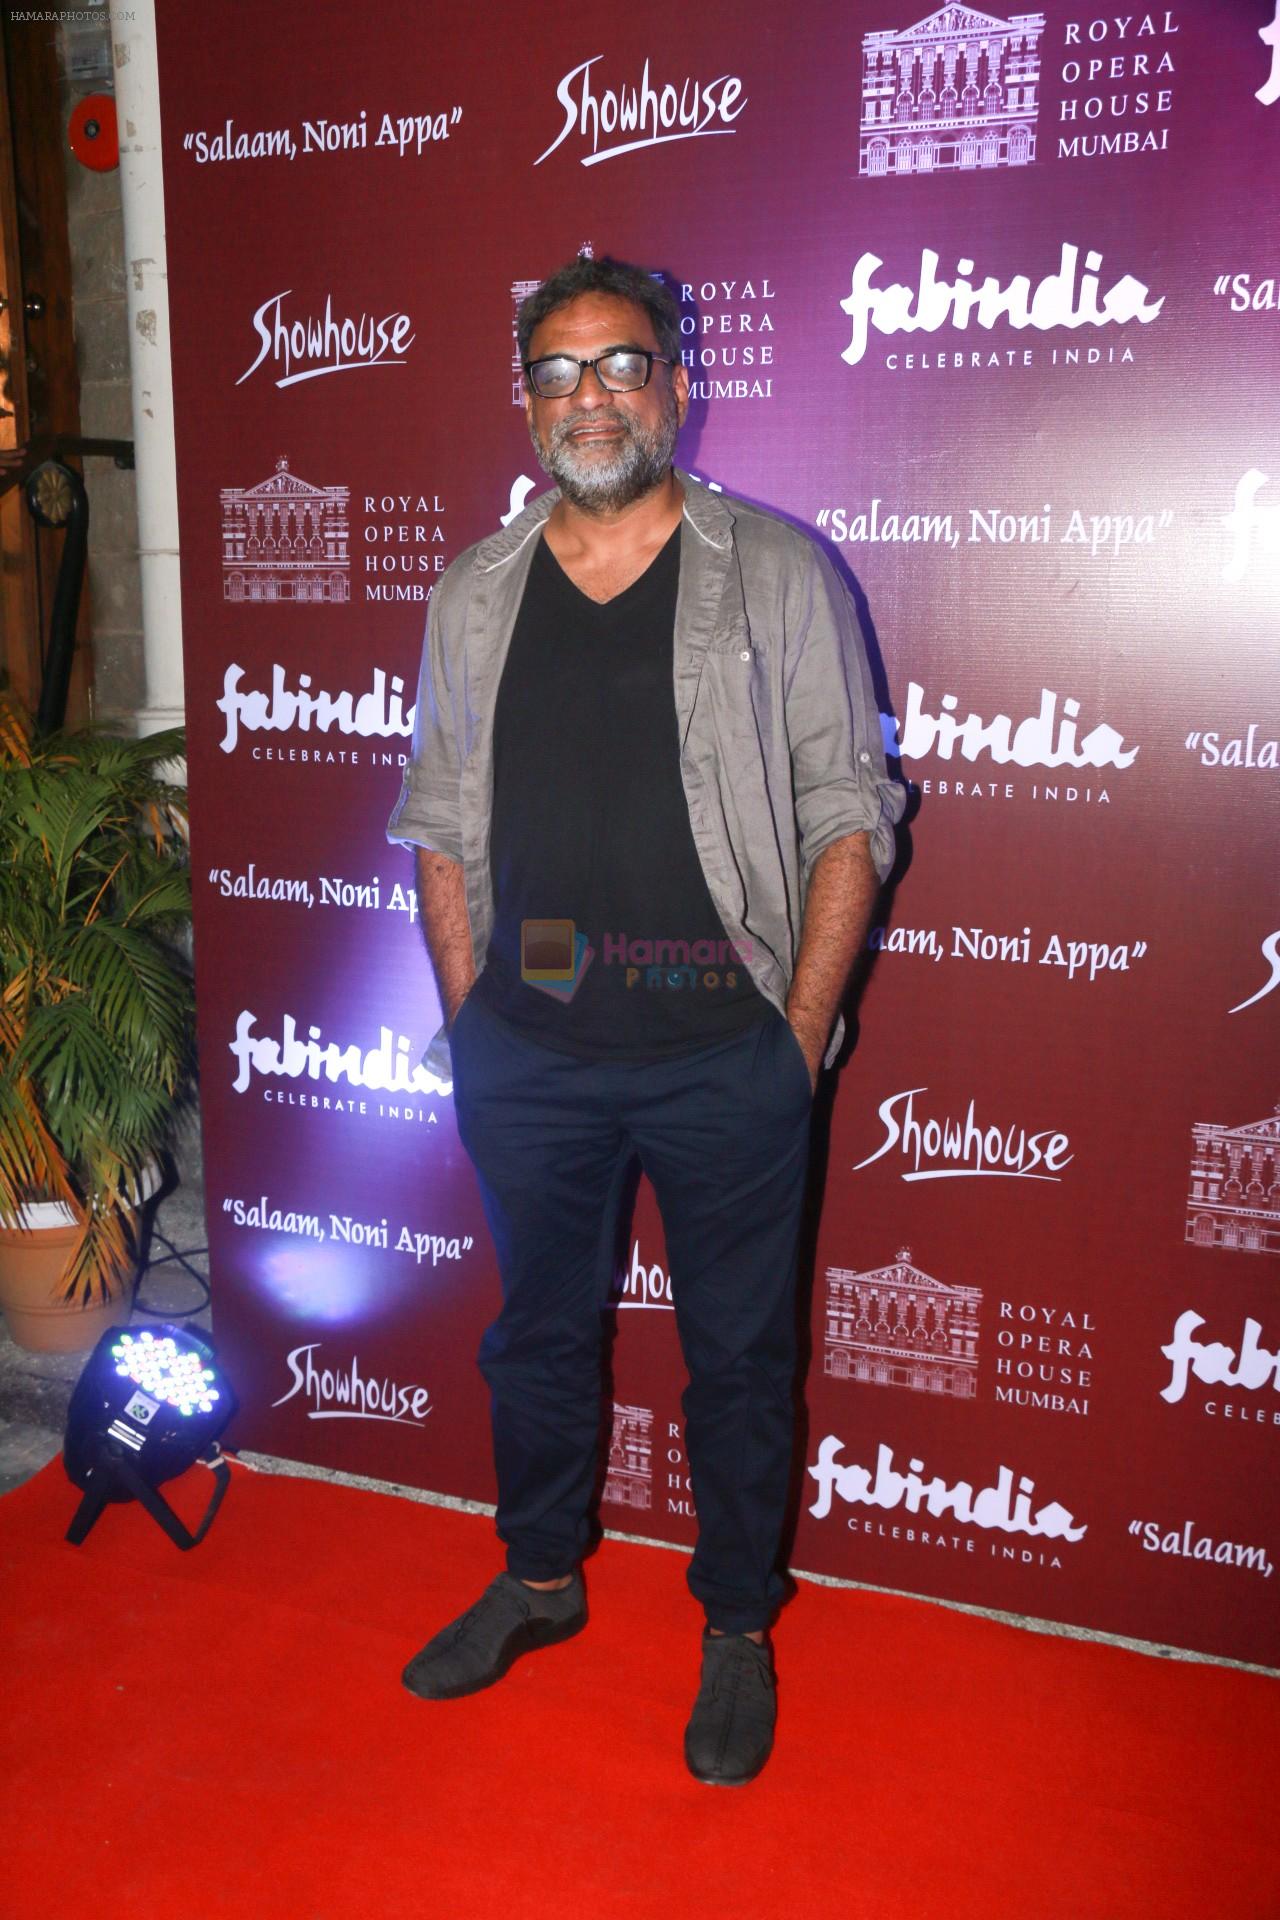 R Balki at the Special preview of Salaam Noni Appa based on Twinkle Khanna's novel at Royal Opera House in mumbai on 28th Oct 2017